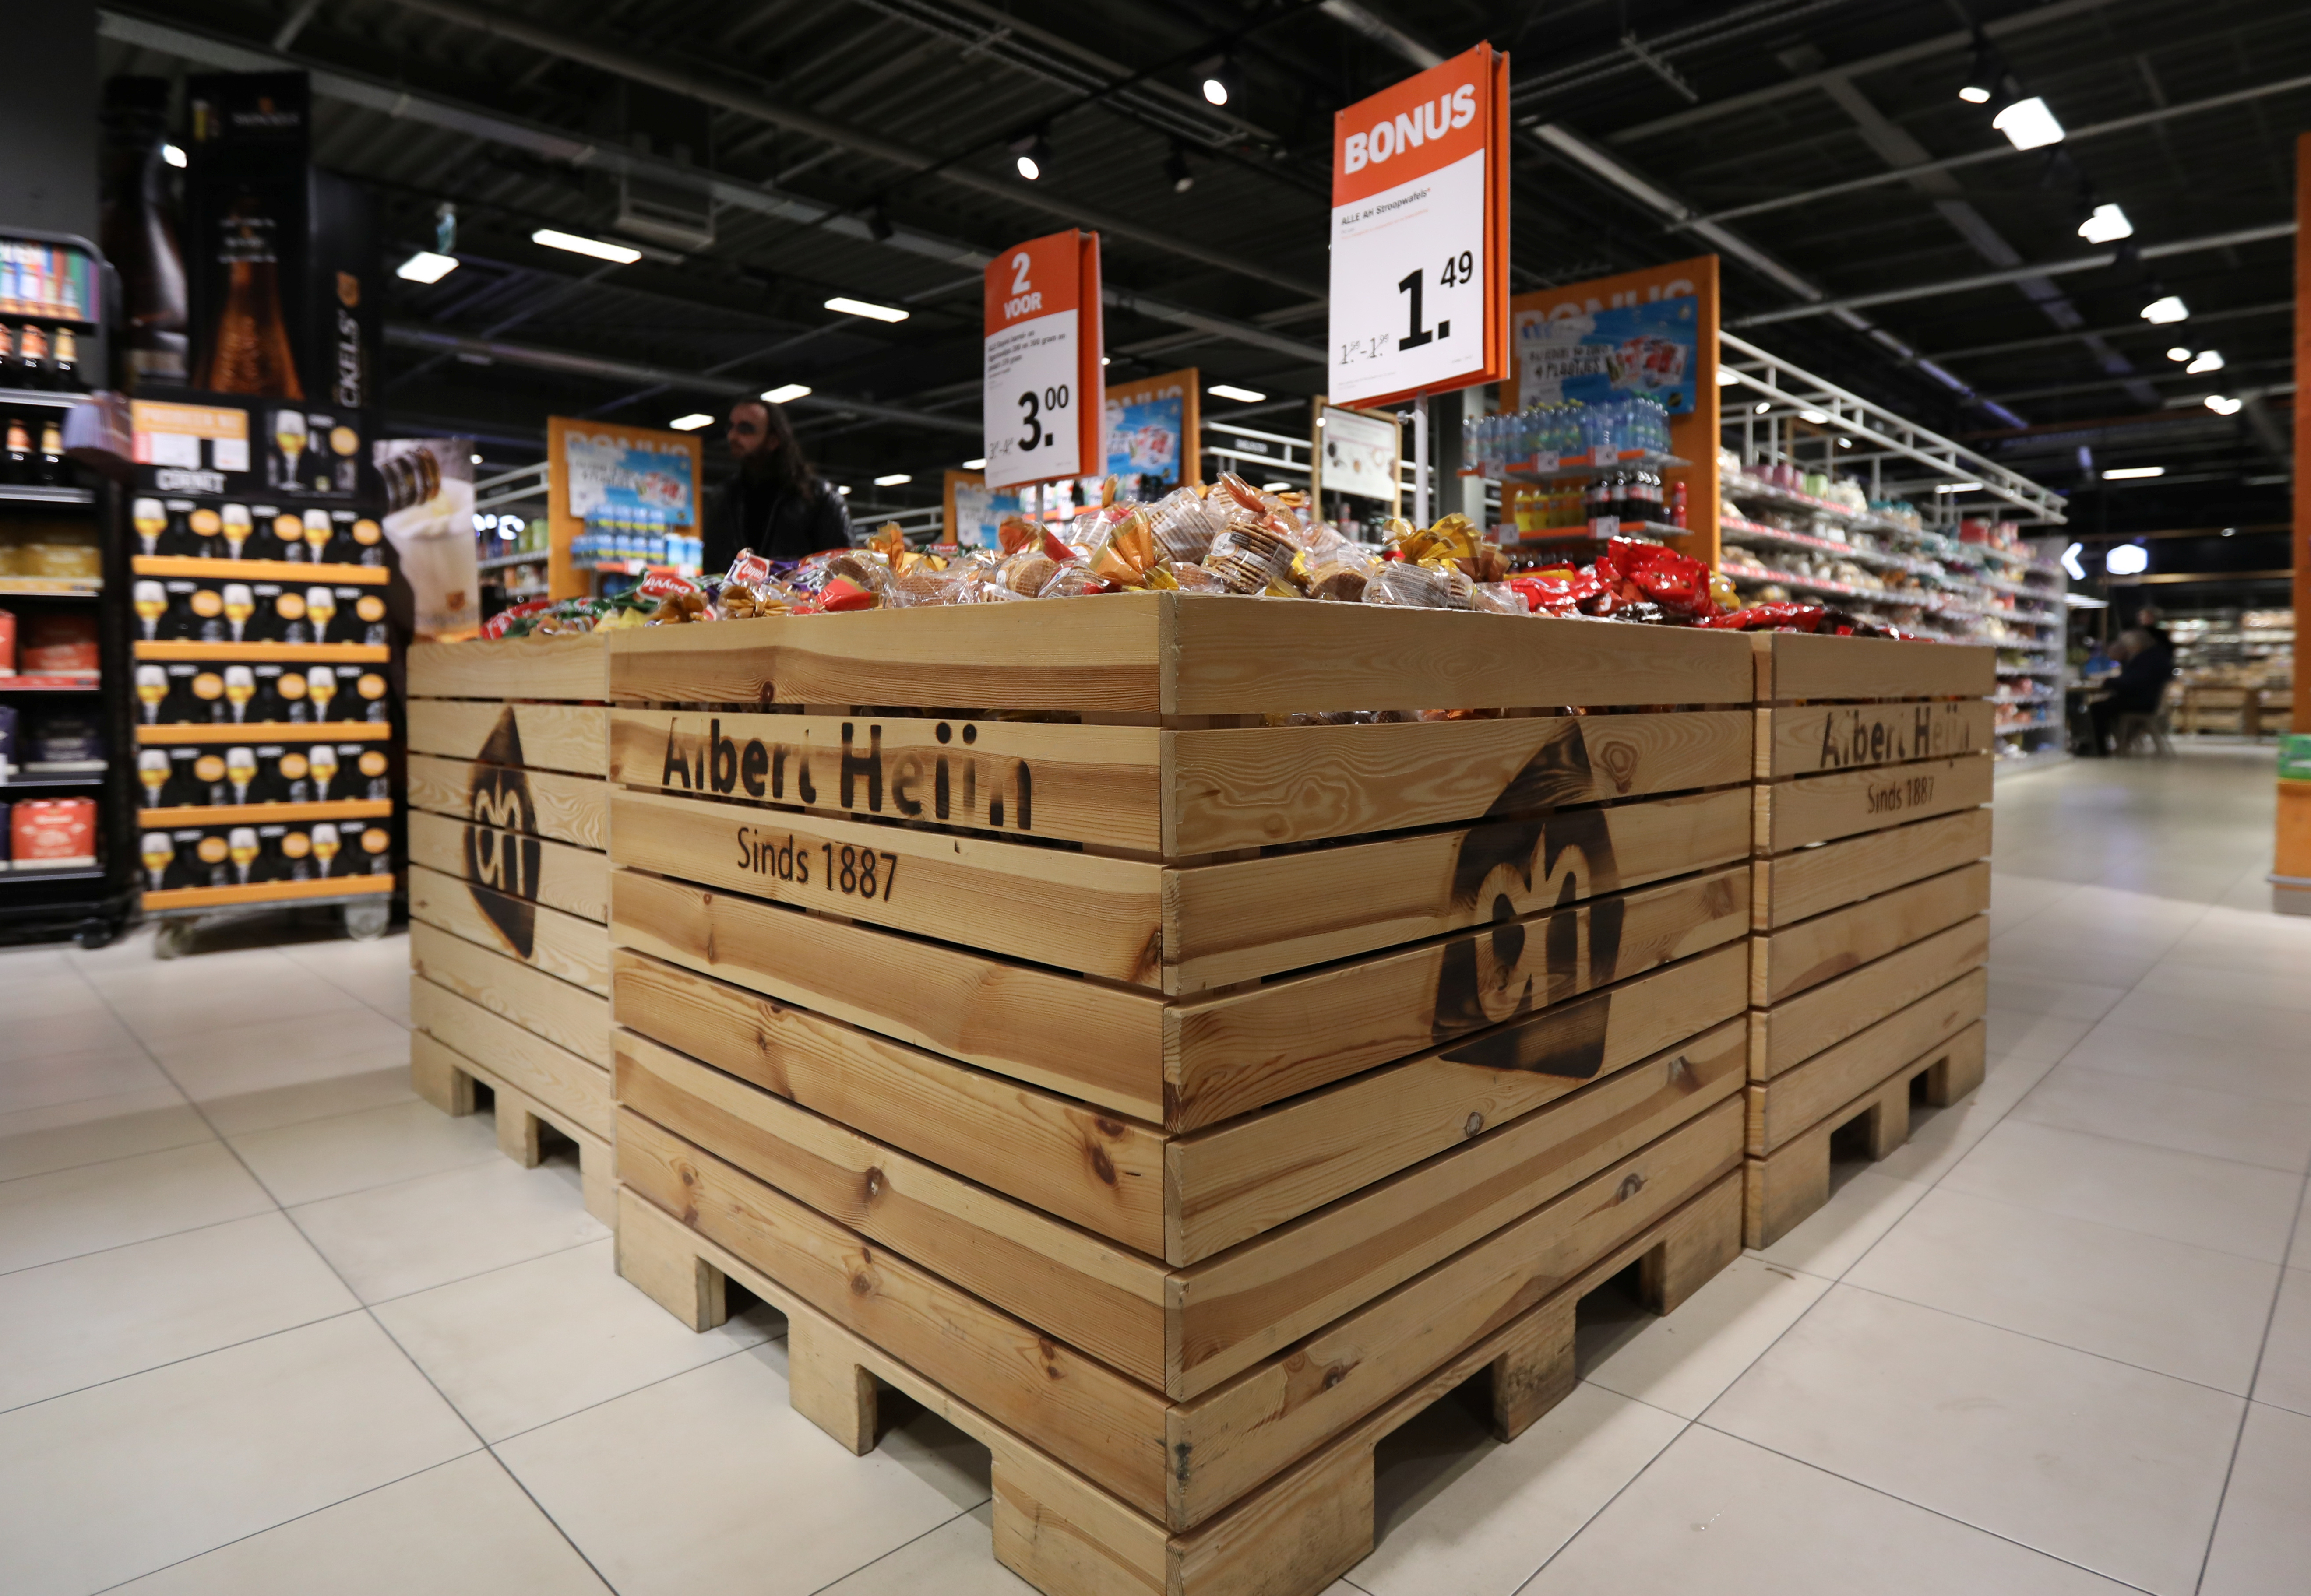 Logo of Albert Heijn is seen inside a shop operated by Ahold Delhaize, the Dutch-Belgian supermarket operator, in Eindhoven